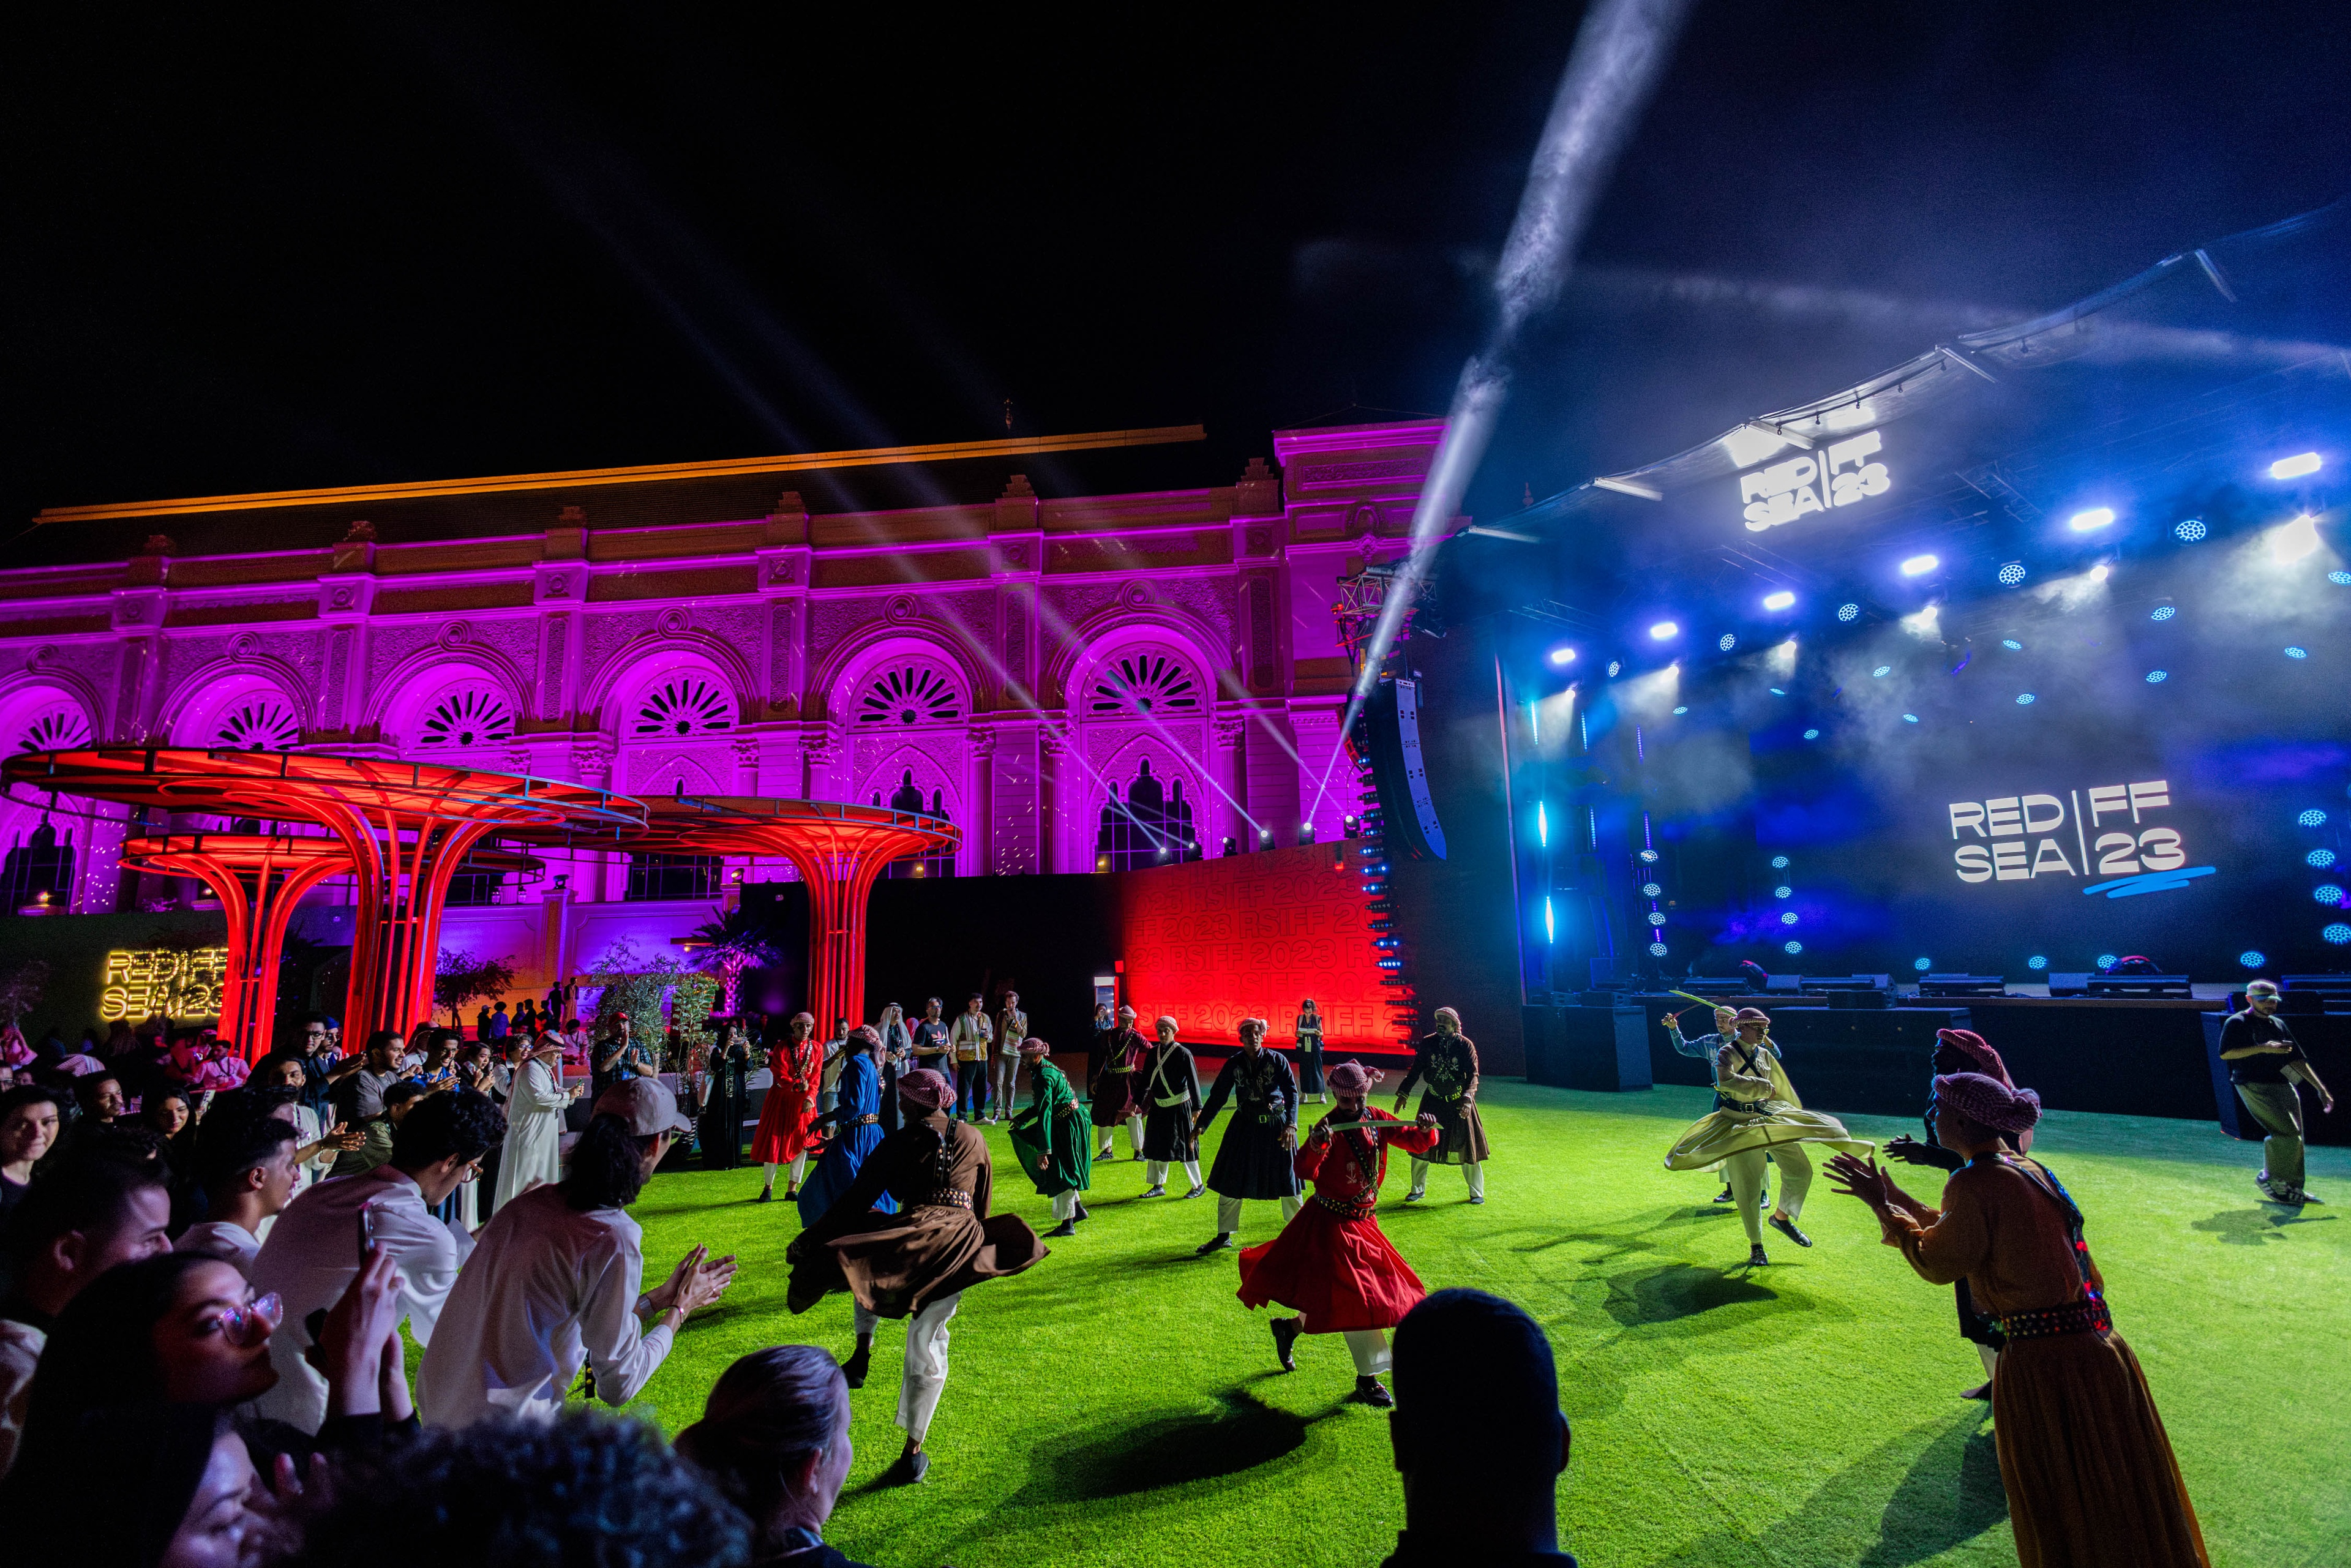 Dancers performing for crowd on green turf with pink and blue lights at night